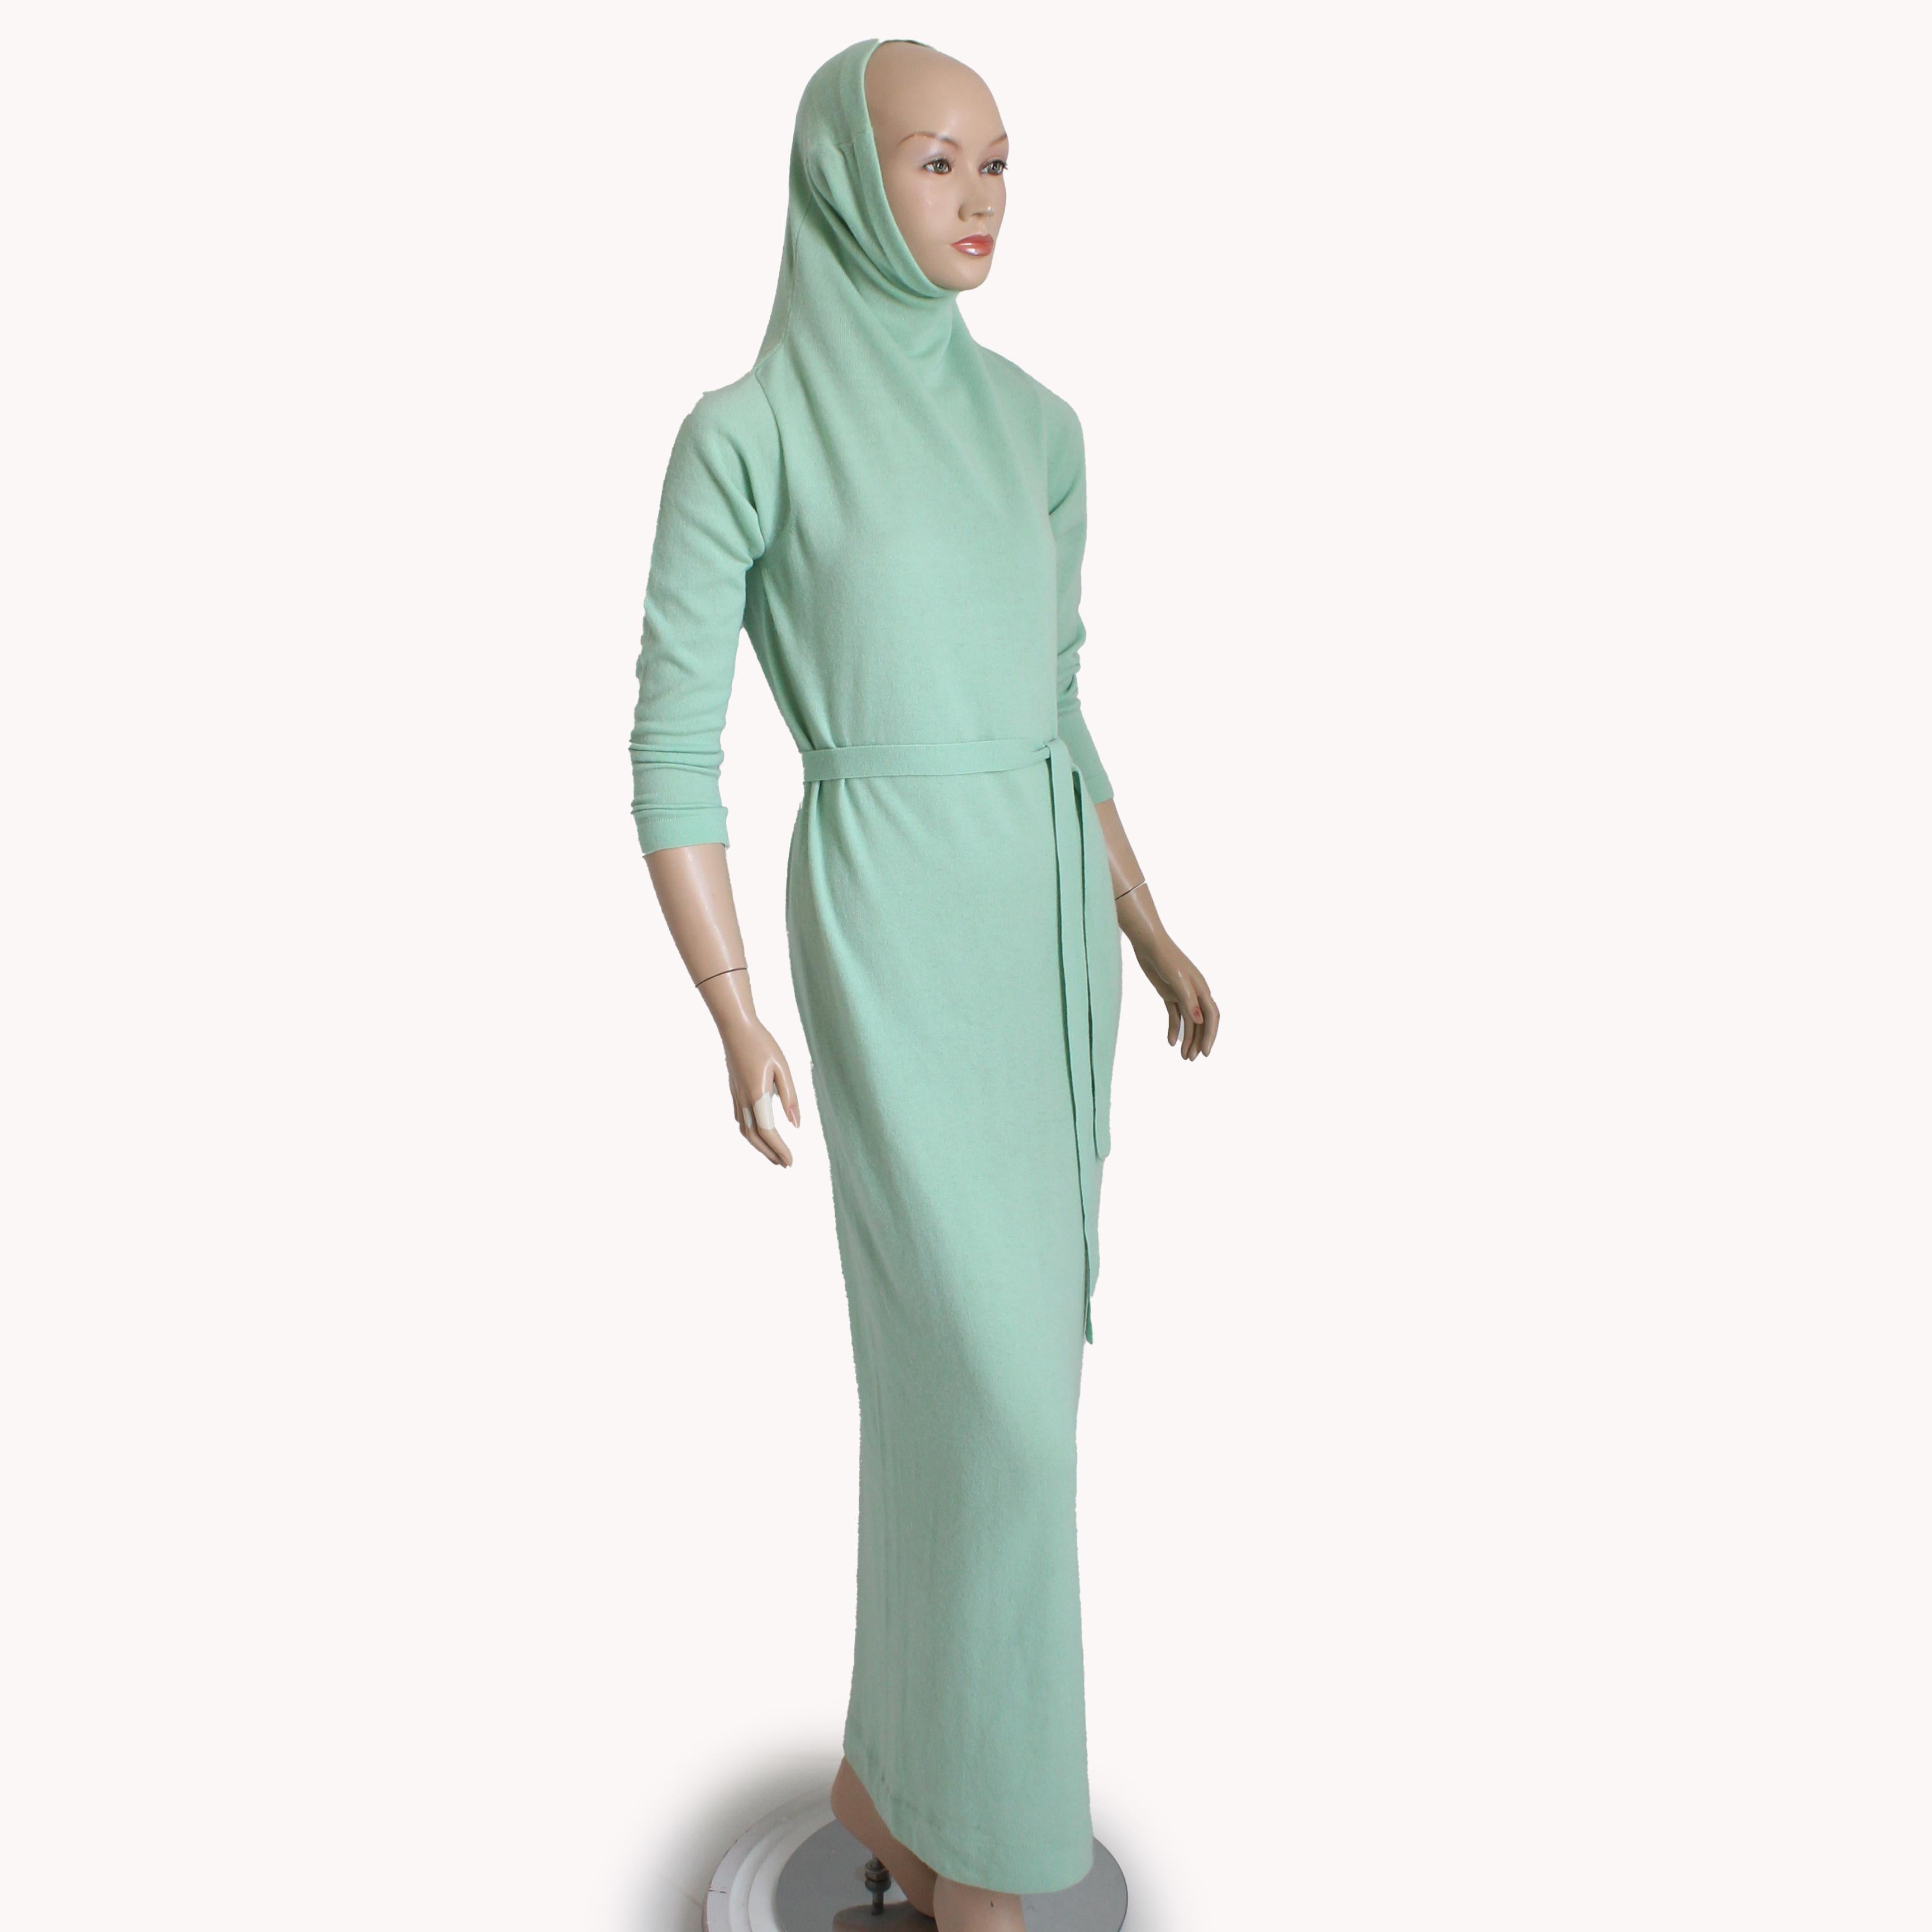 Preowned, vintage Bonnie Cashin belted maxi dress, likely made in the mid 70s. Made from a supple cashmere knit in a gorgeous mint green color, it slips over the head and is unlined, and comes with its original matching belt. The funnel neck is a